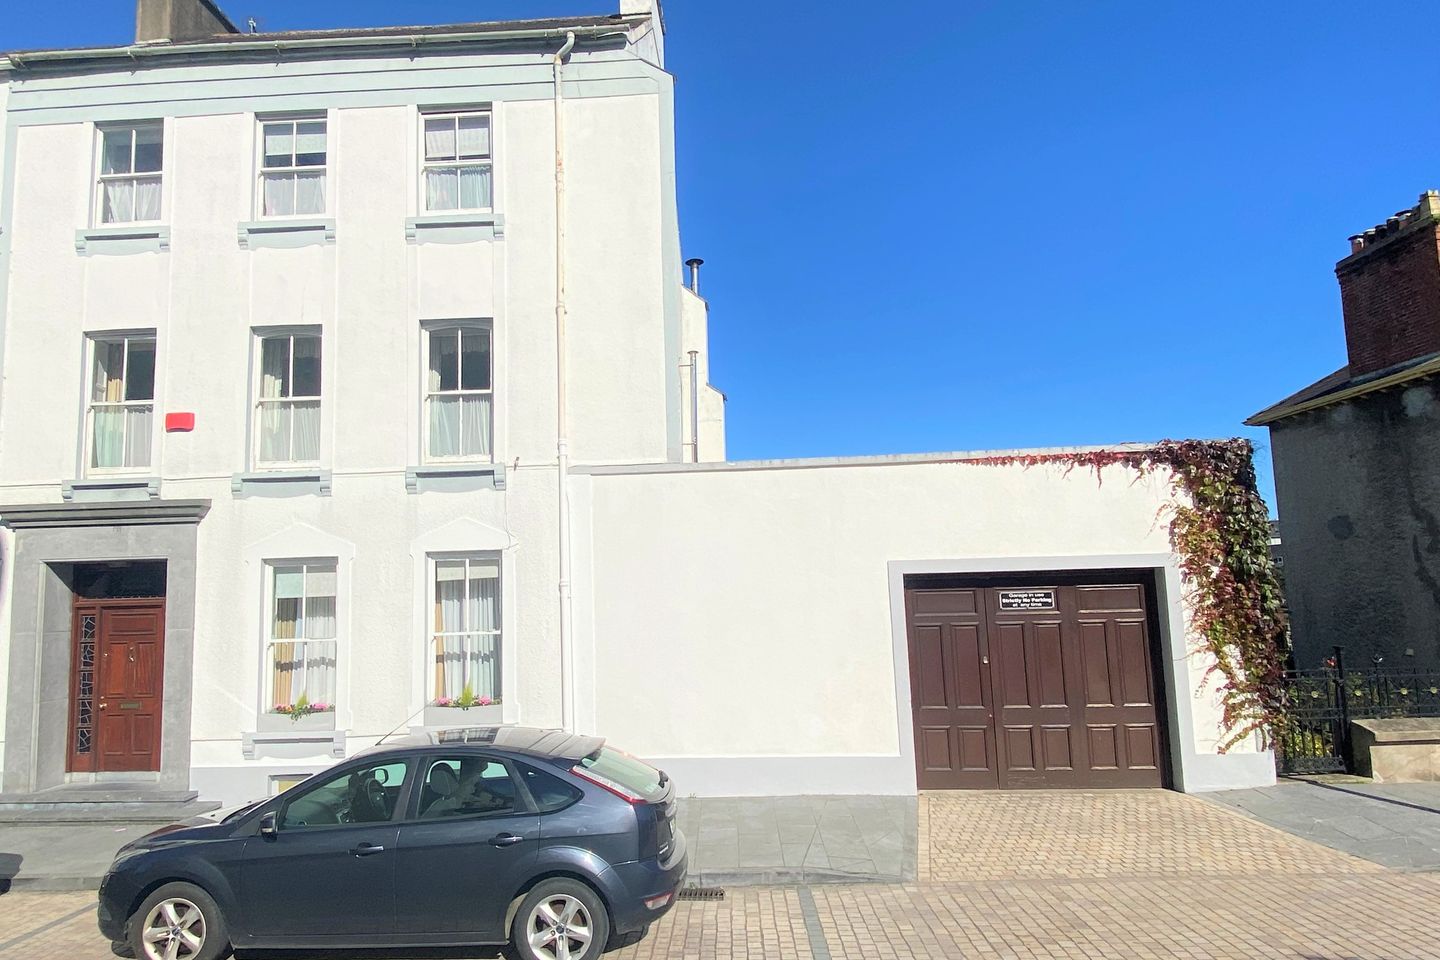 Mary Mount, 3 Emmet Place, Youghal, Co. Cork, P36AH32